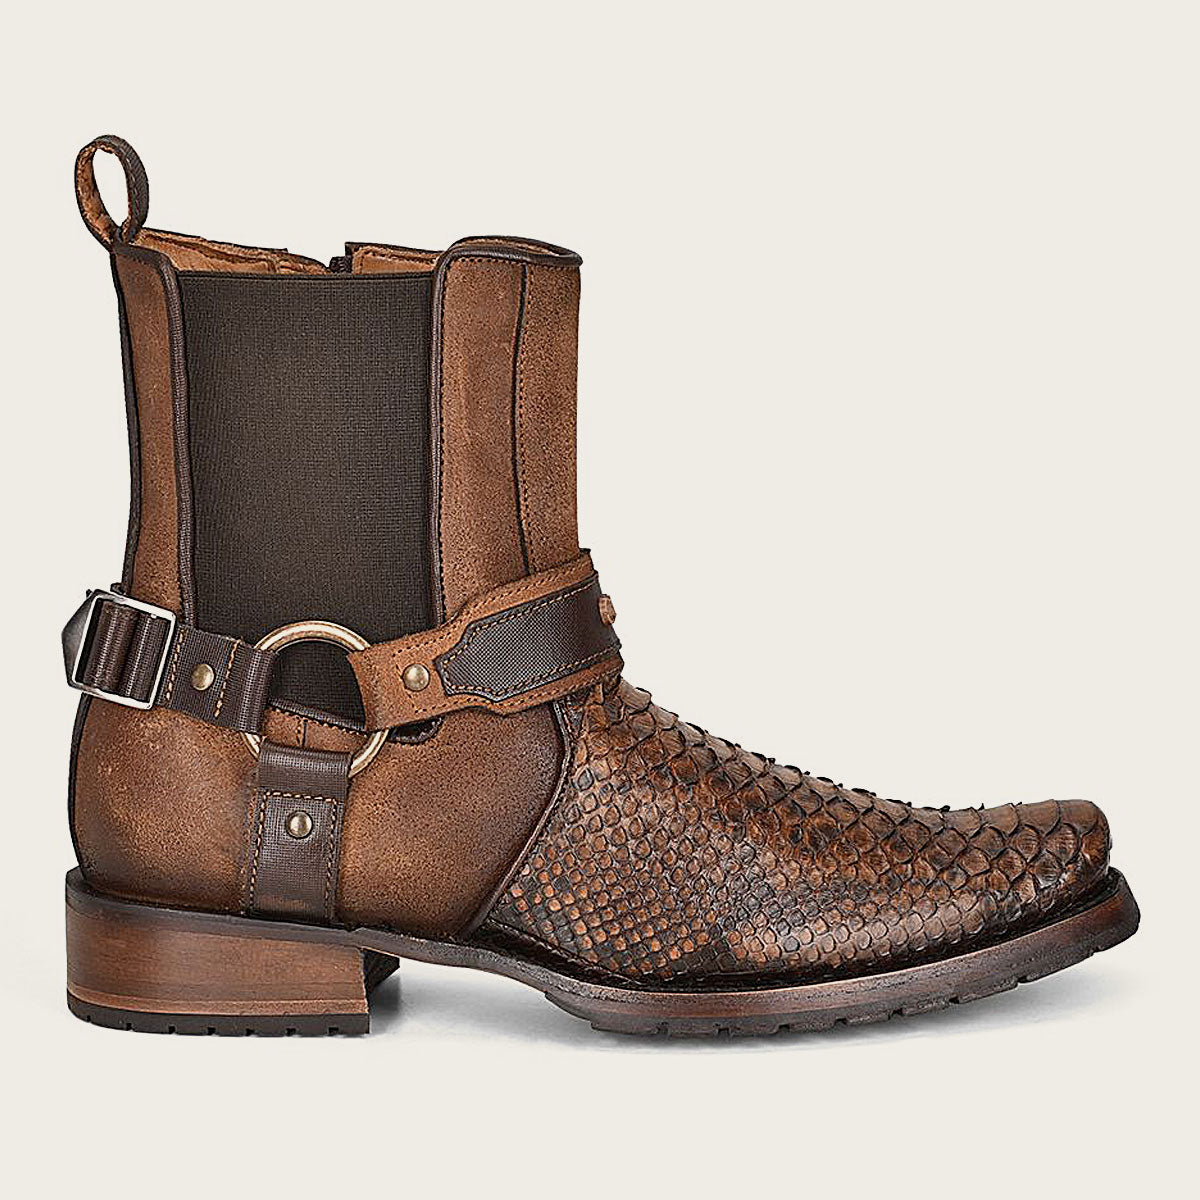 Hand-painted brown python leather ankle boots